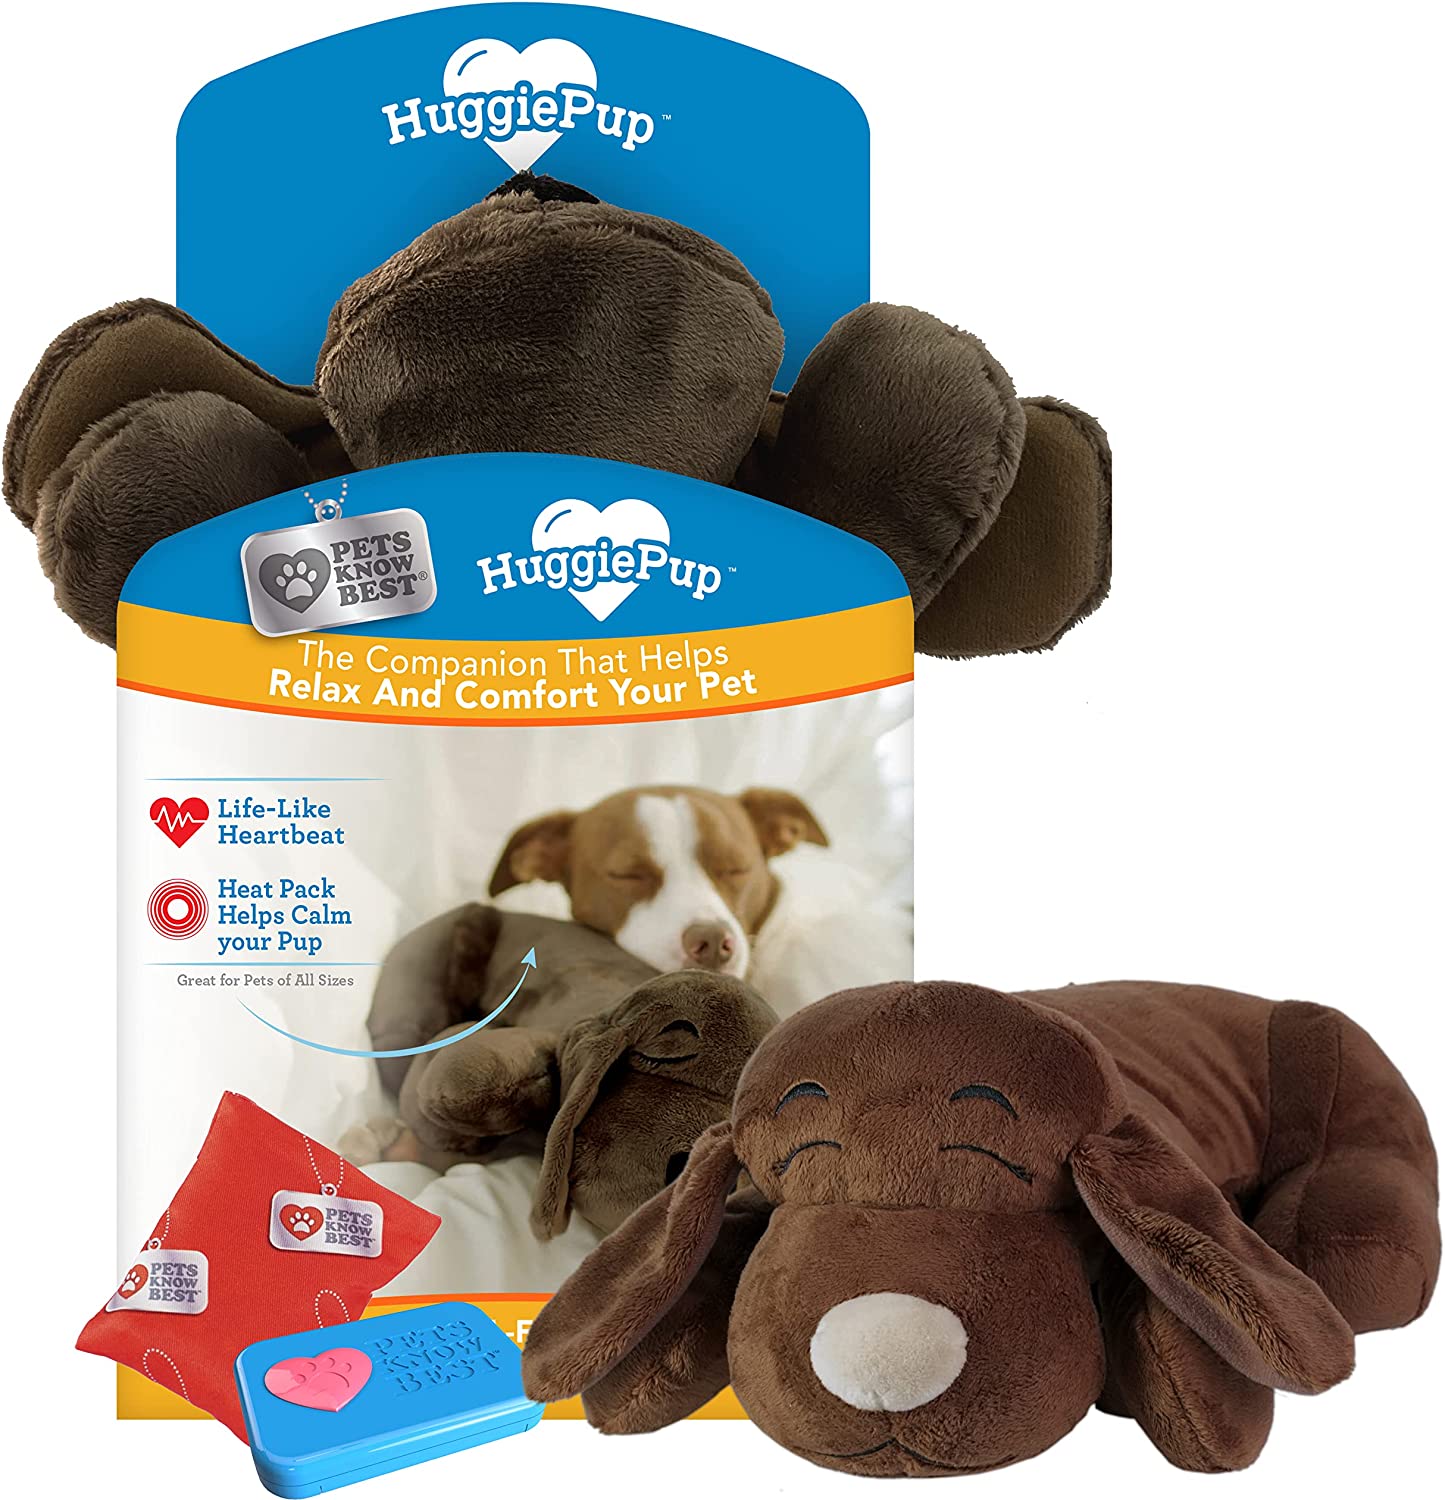 5. HuggiePup by Pets Know Best - Cuddly Puppy Behavioral Aid Toy